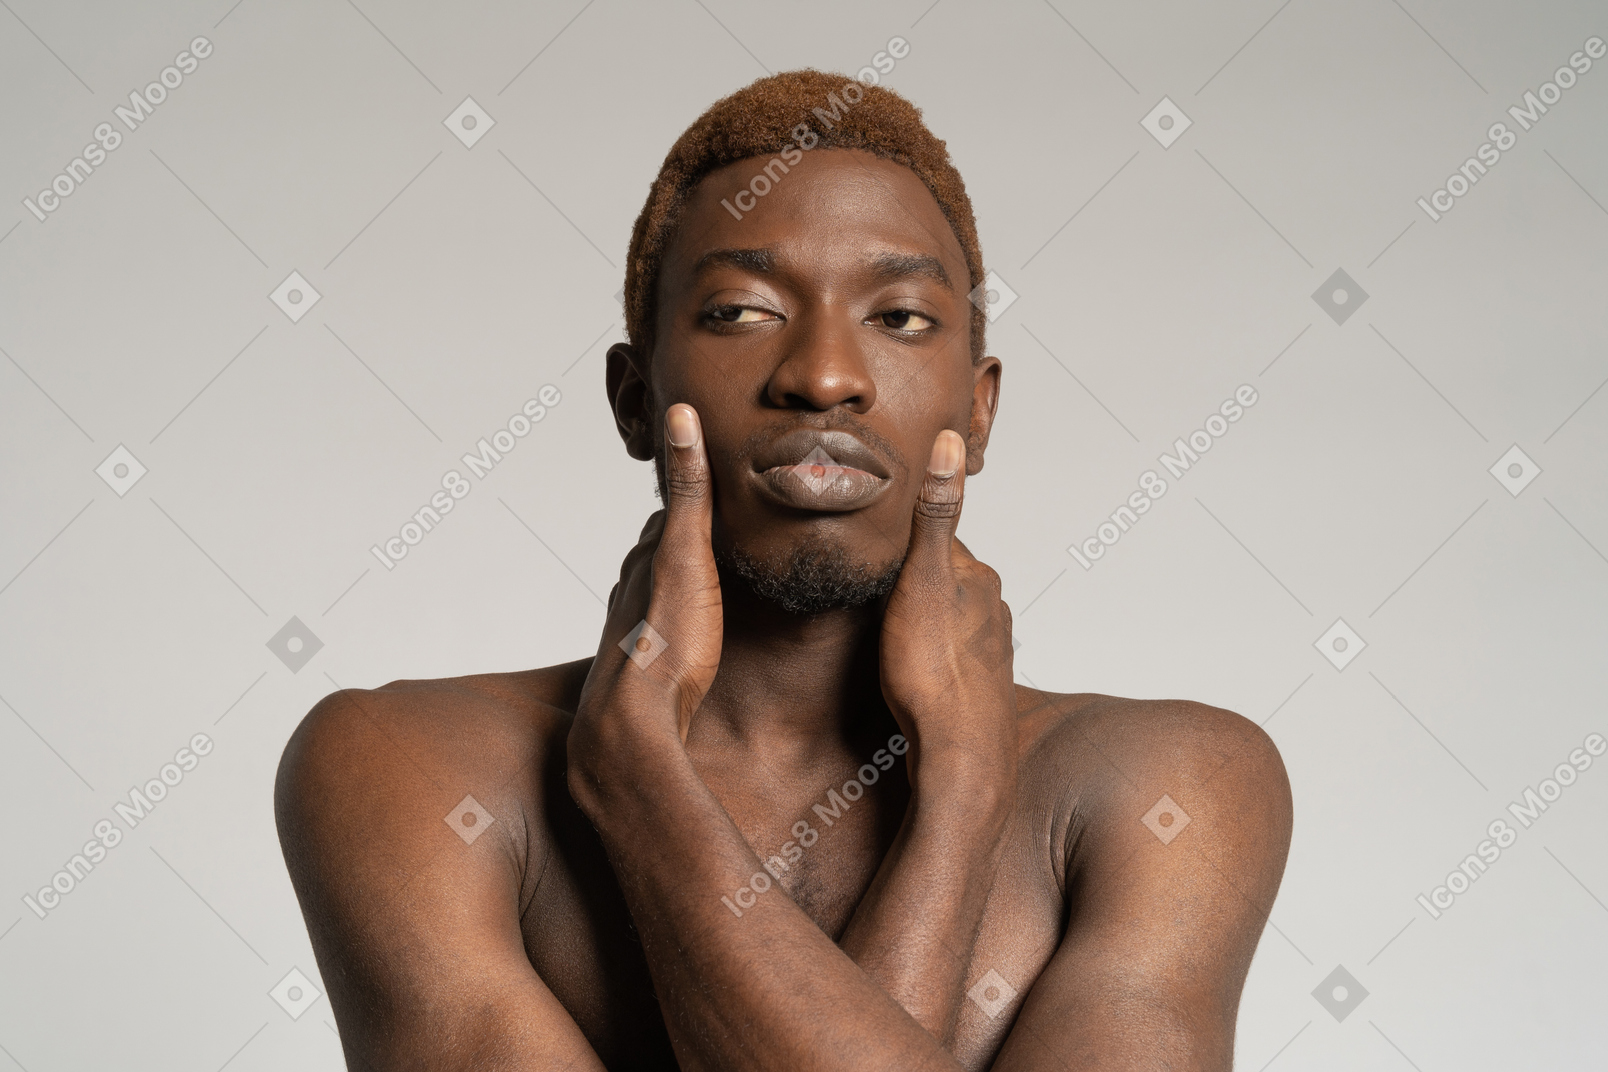 Portrait of young man touching face with both hands